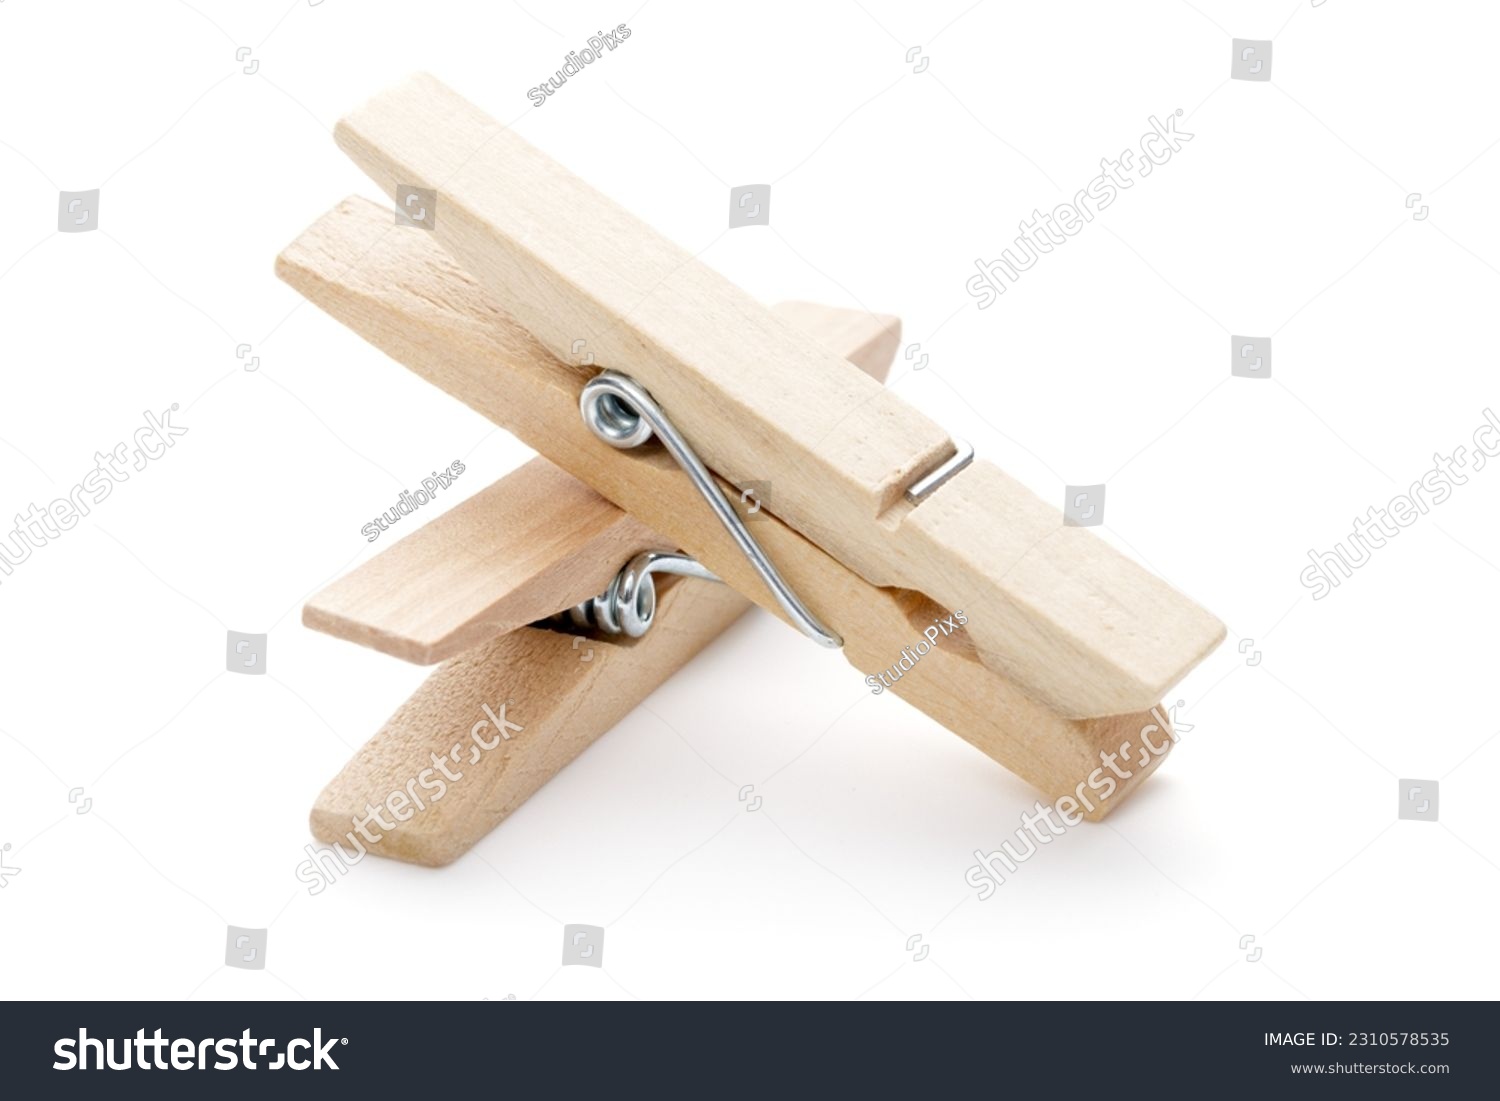 Wooden clothes pegs isolated on white background. Cutout. Clothespin.  #2310578535